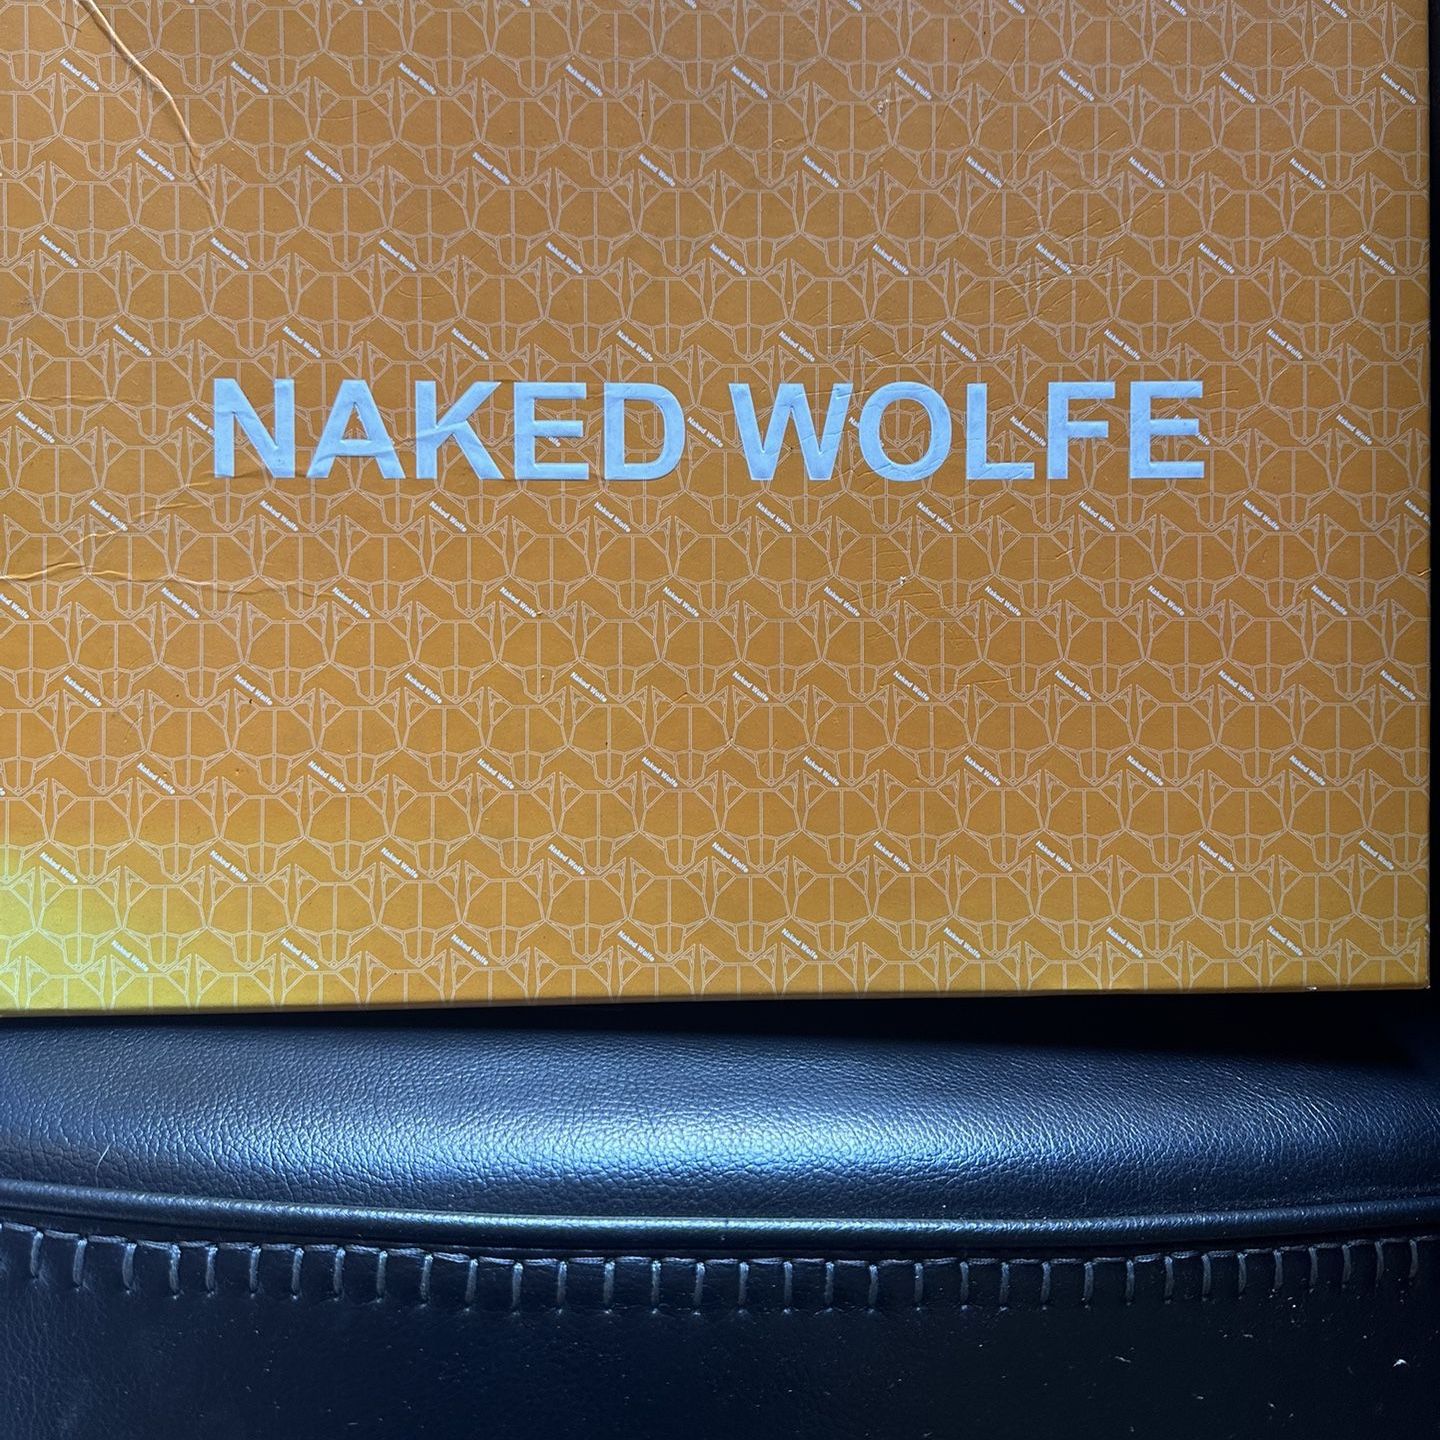 Naked Wolfe Boots